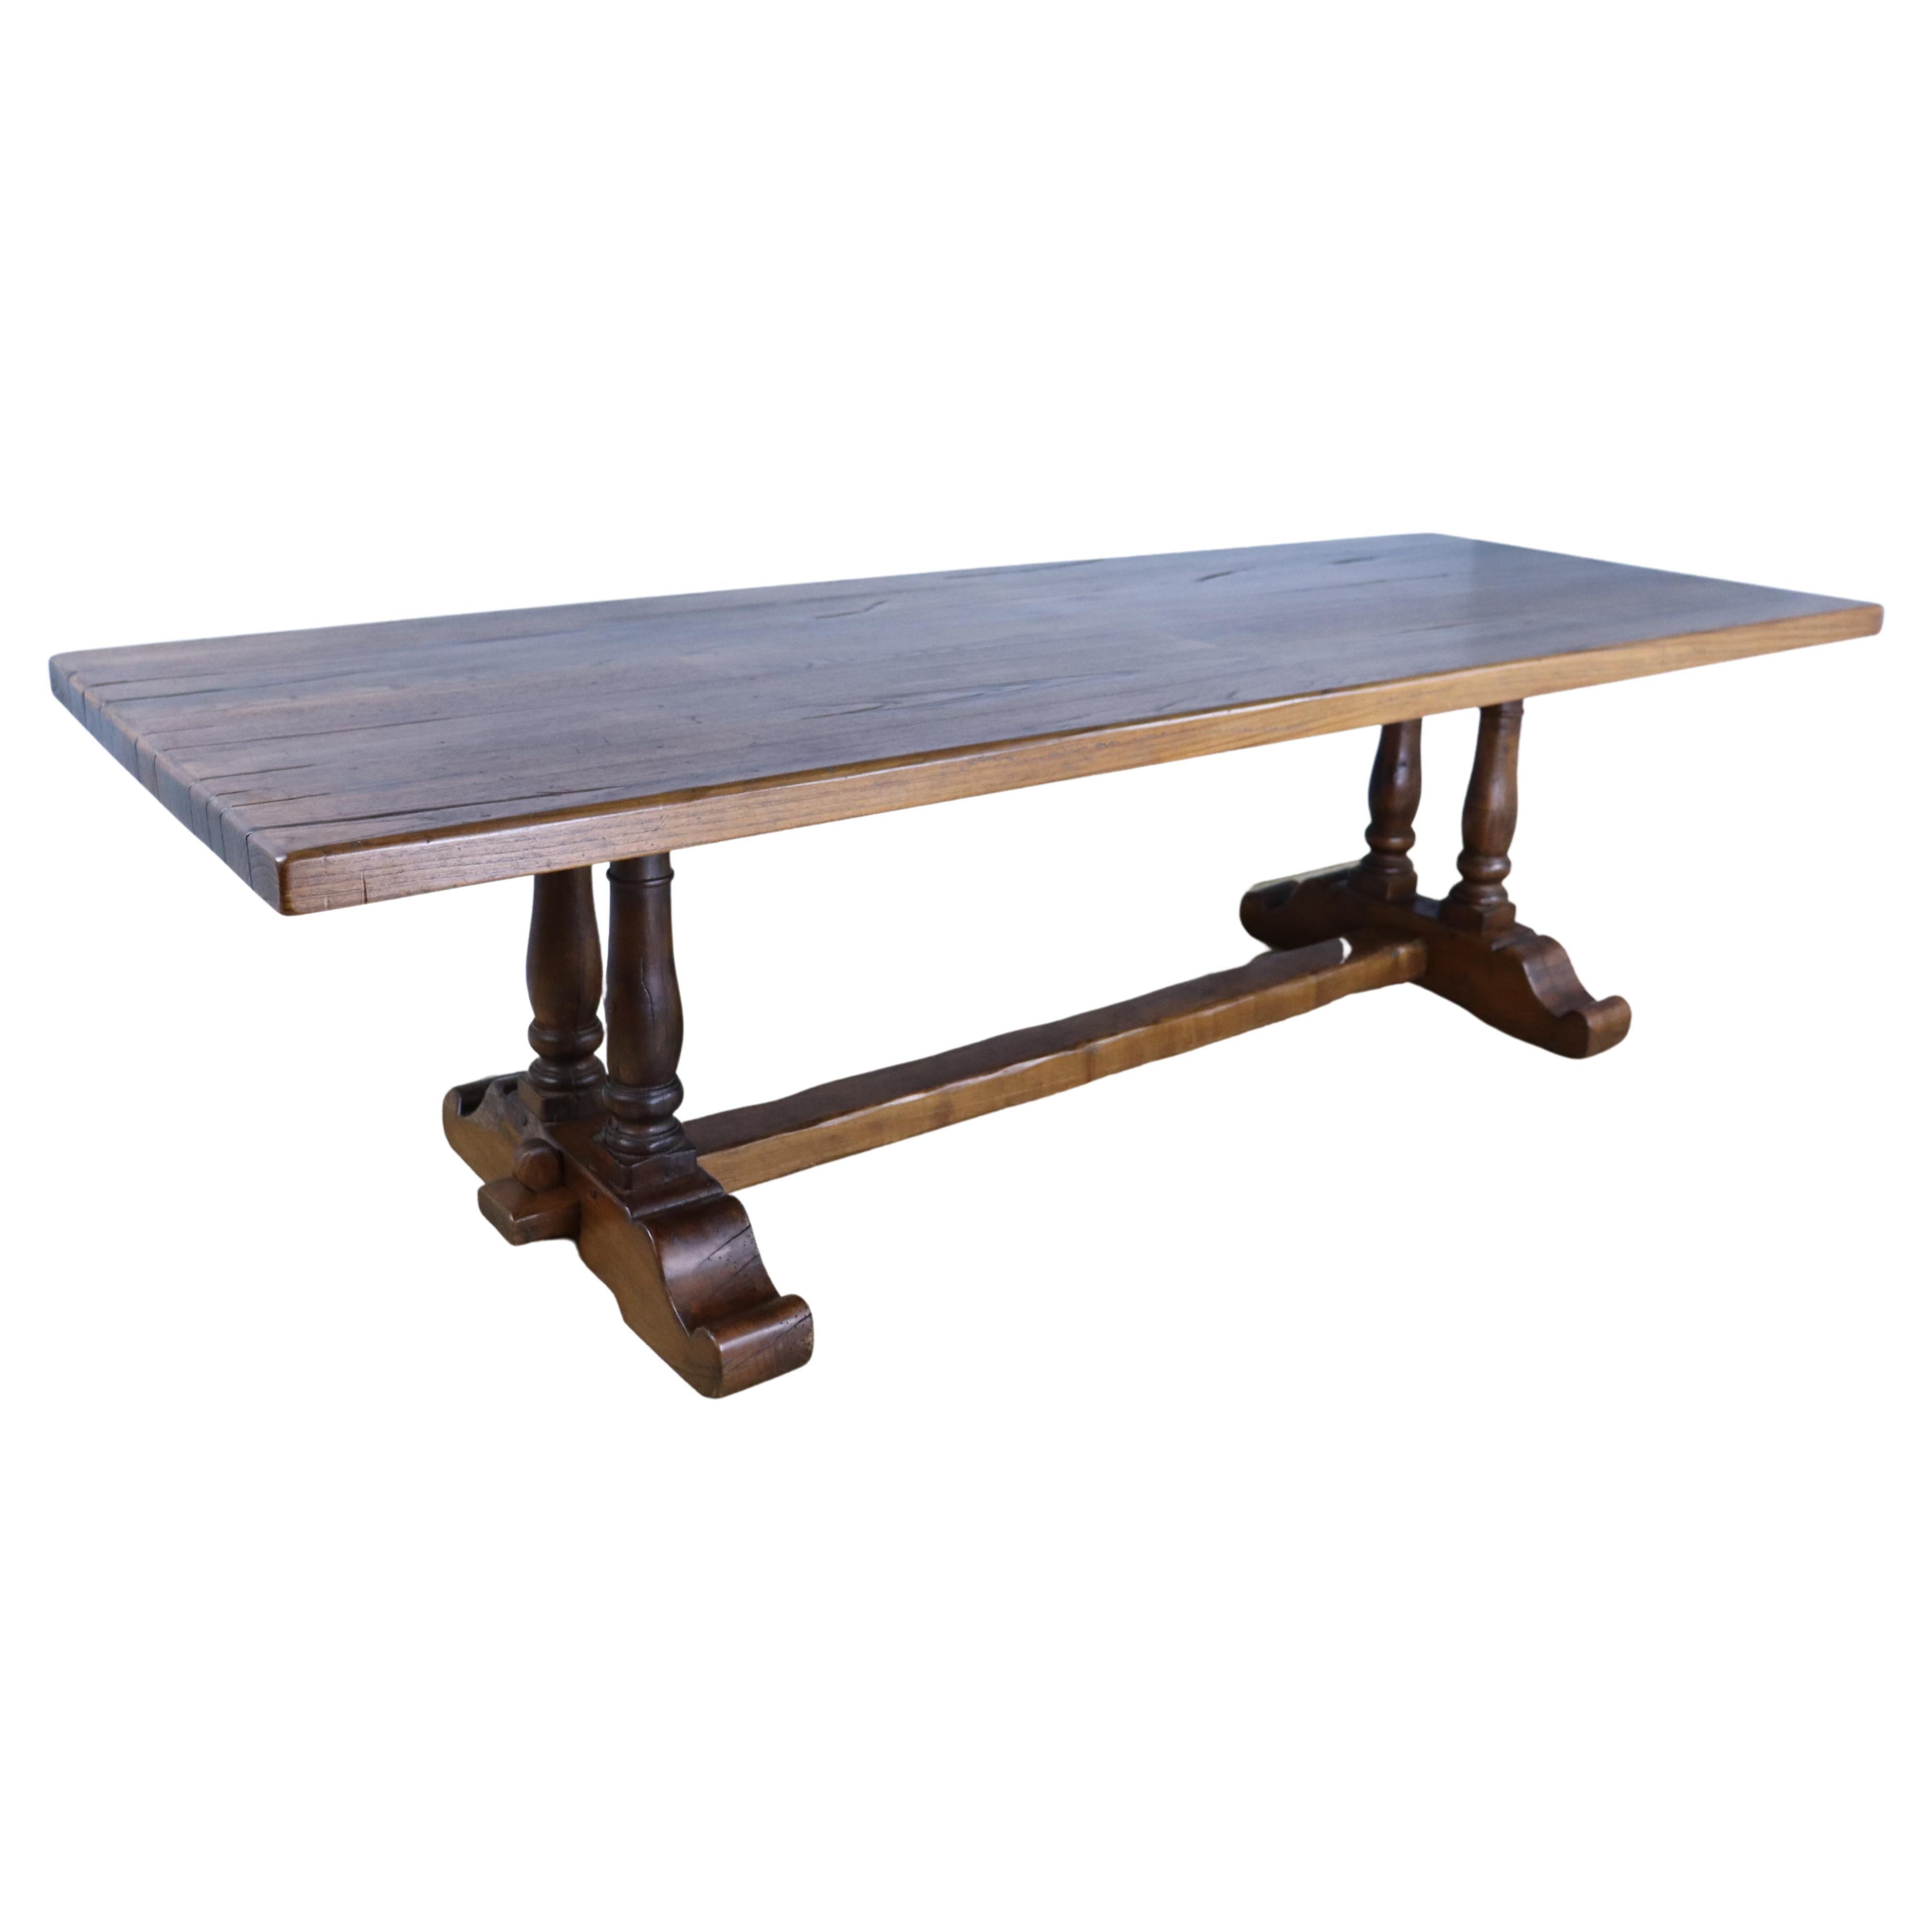 Imposing 19th Century Oak Dining Table with Double Barrel Supports